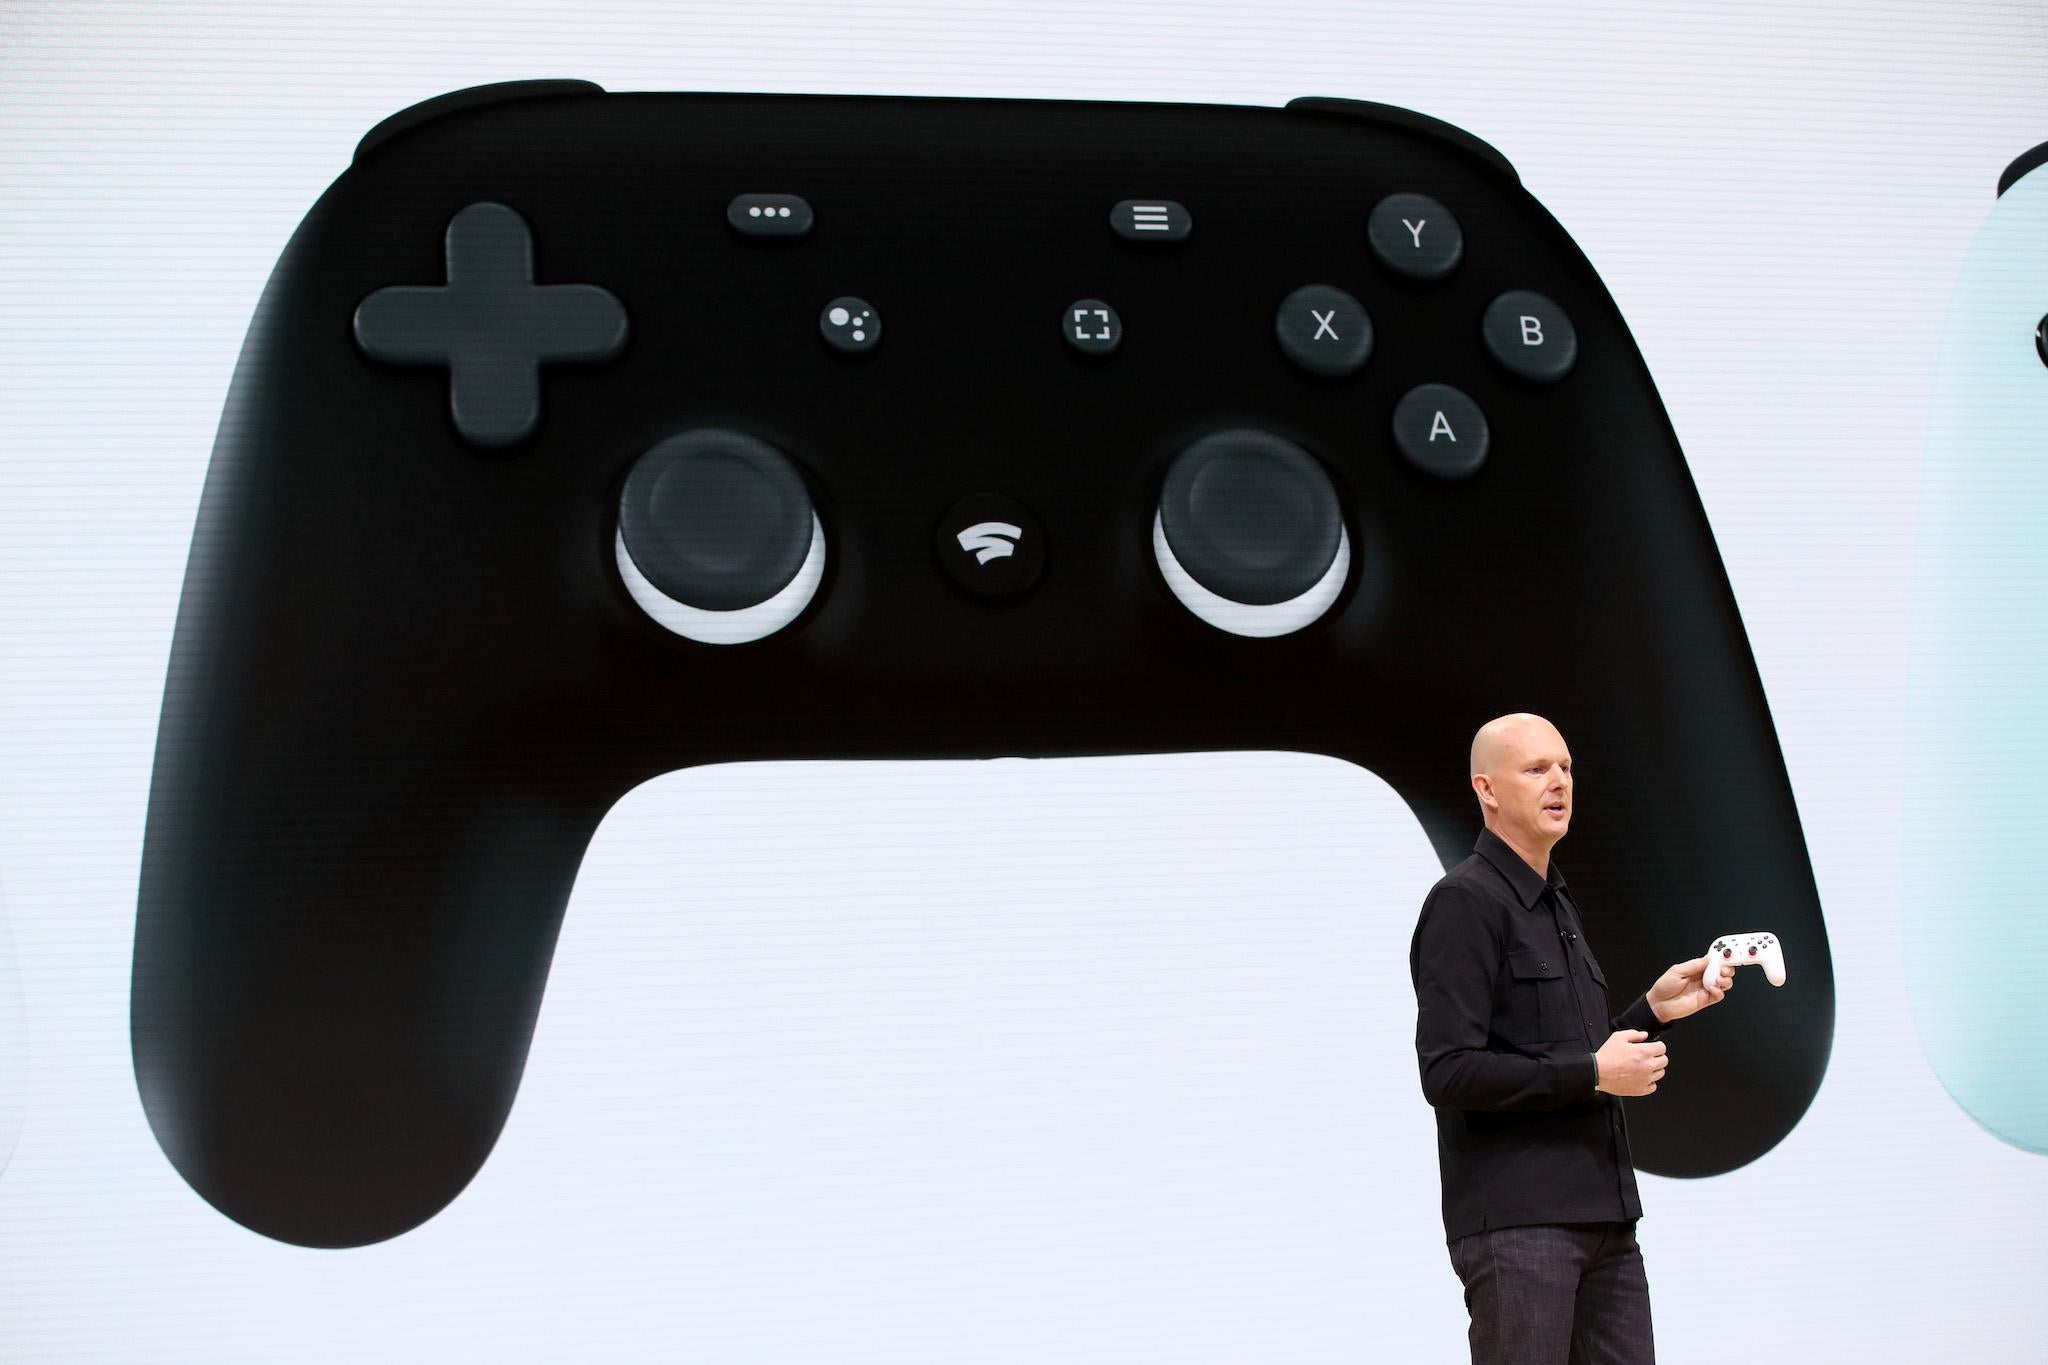 Google vice president and general manager Phil Harrison shows the new Stadia controller as he speaks during the GDC Game Developers Conference on March 19, 2019